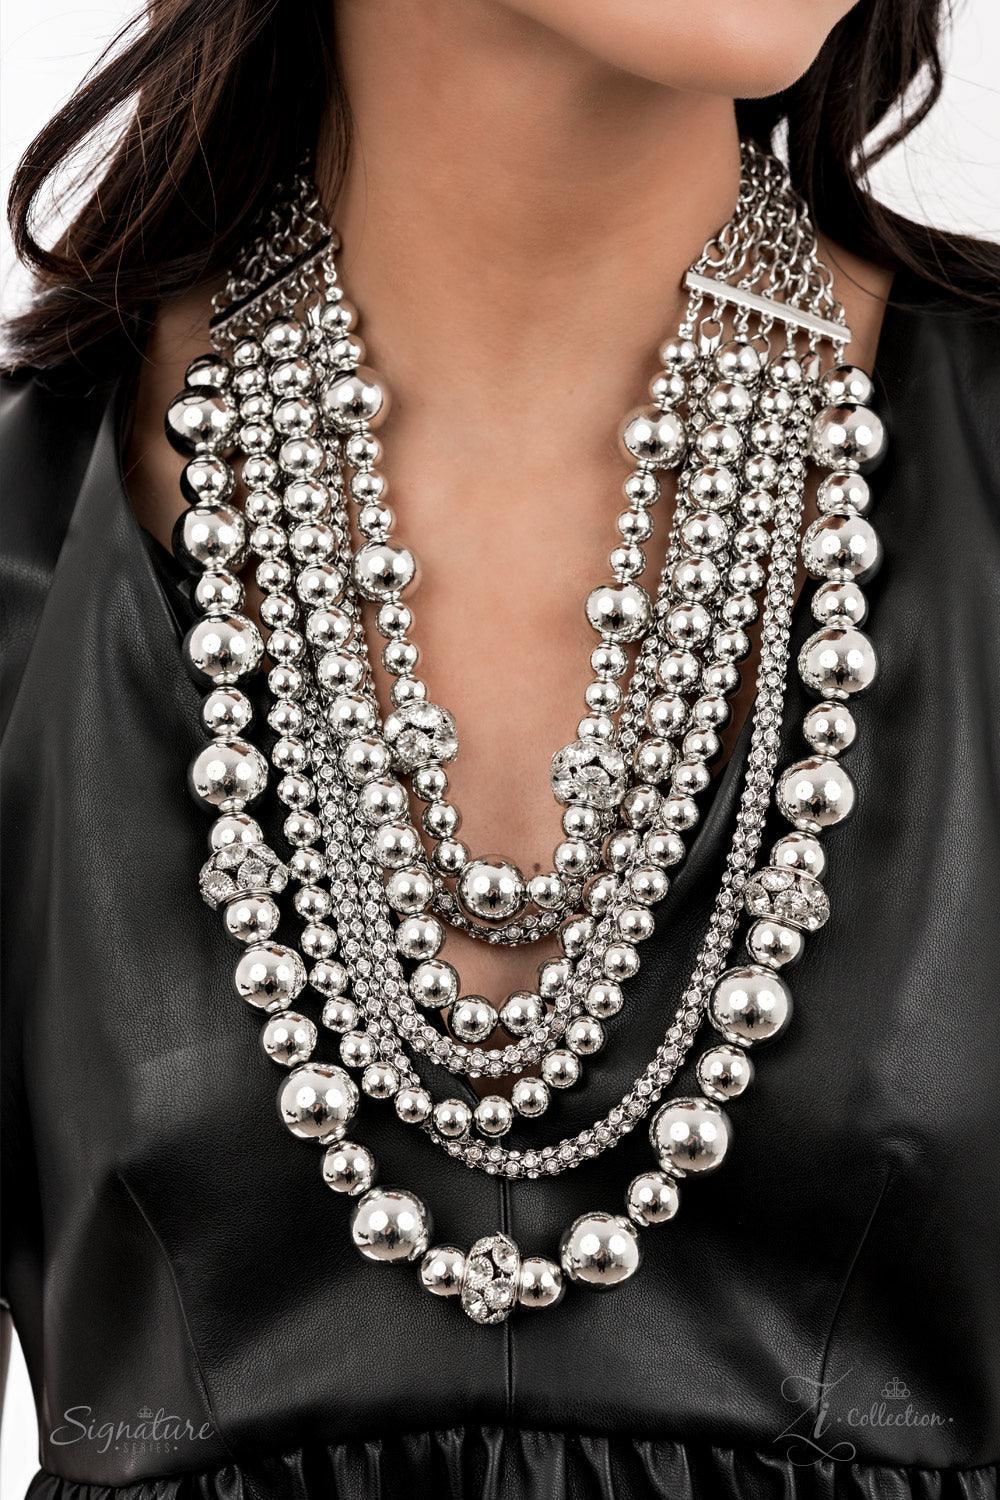 Paparazzi Accessories The Liberty Held together by rectangular silver frames, a couture-clutching collection of oversized silver beads interspersed with white rhinestone encrusted ornaments alternates with interlocking rows of white rhinestone encrusted c